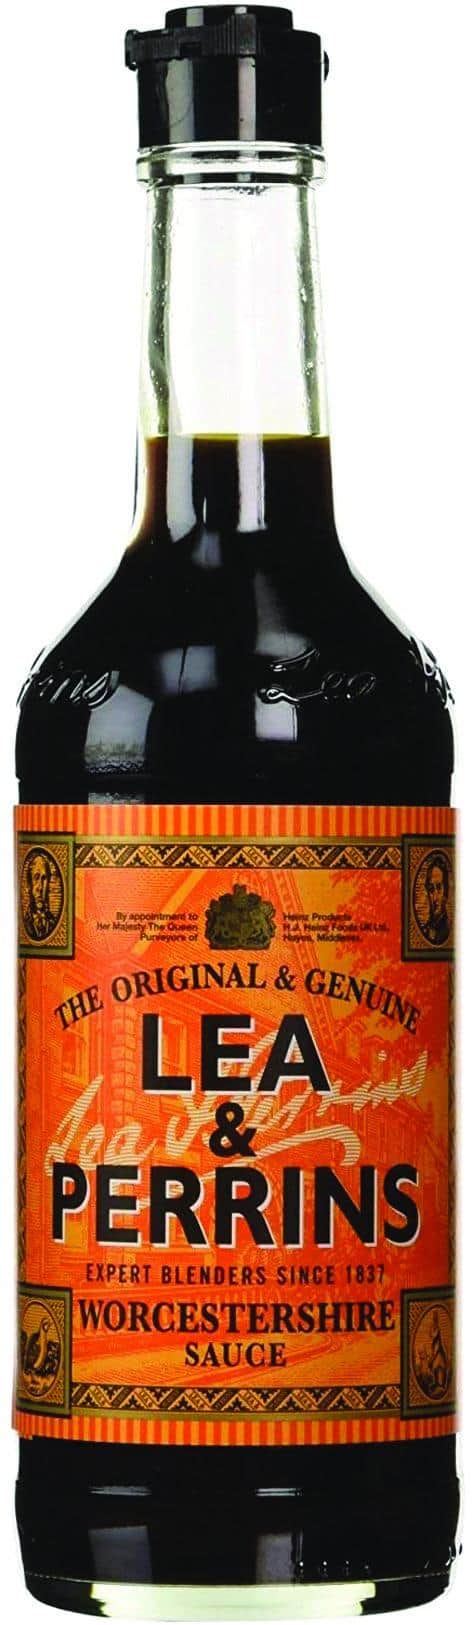 Lea & Perrins Worcestershire Sauce was co-created by the grandfather of Ardross Estate owner Dyson Perrins